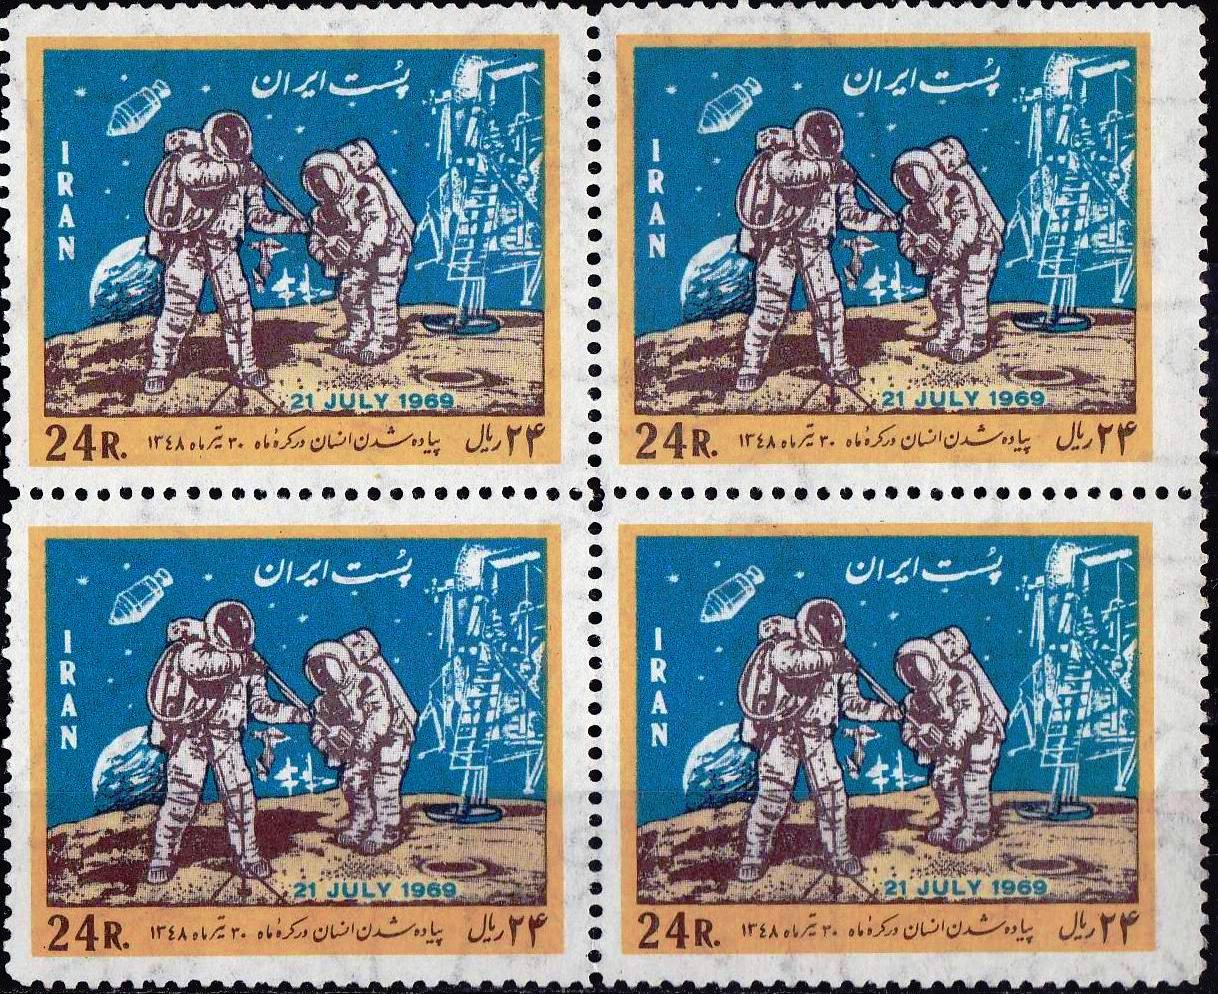 Iran 1986 Stamp Failure Of US Military Aggression Againt Iran - Click Image to Close